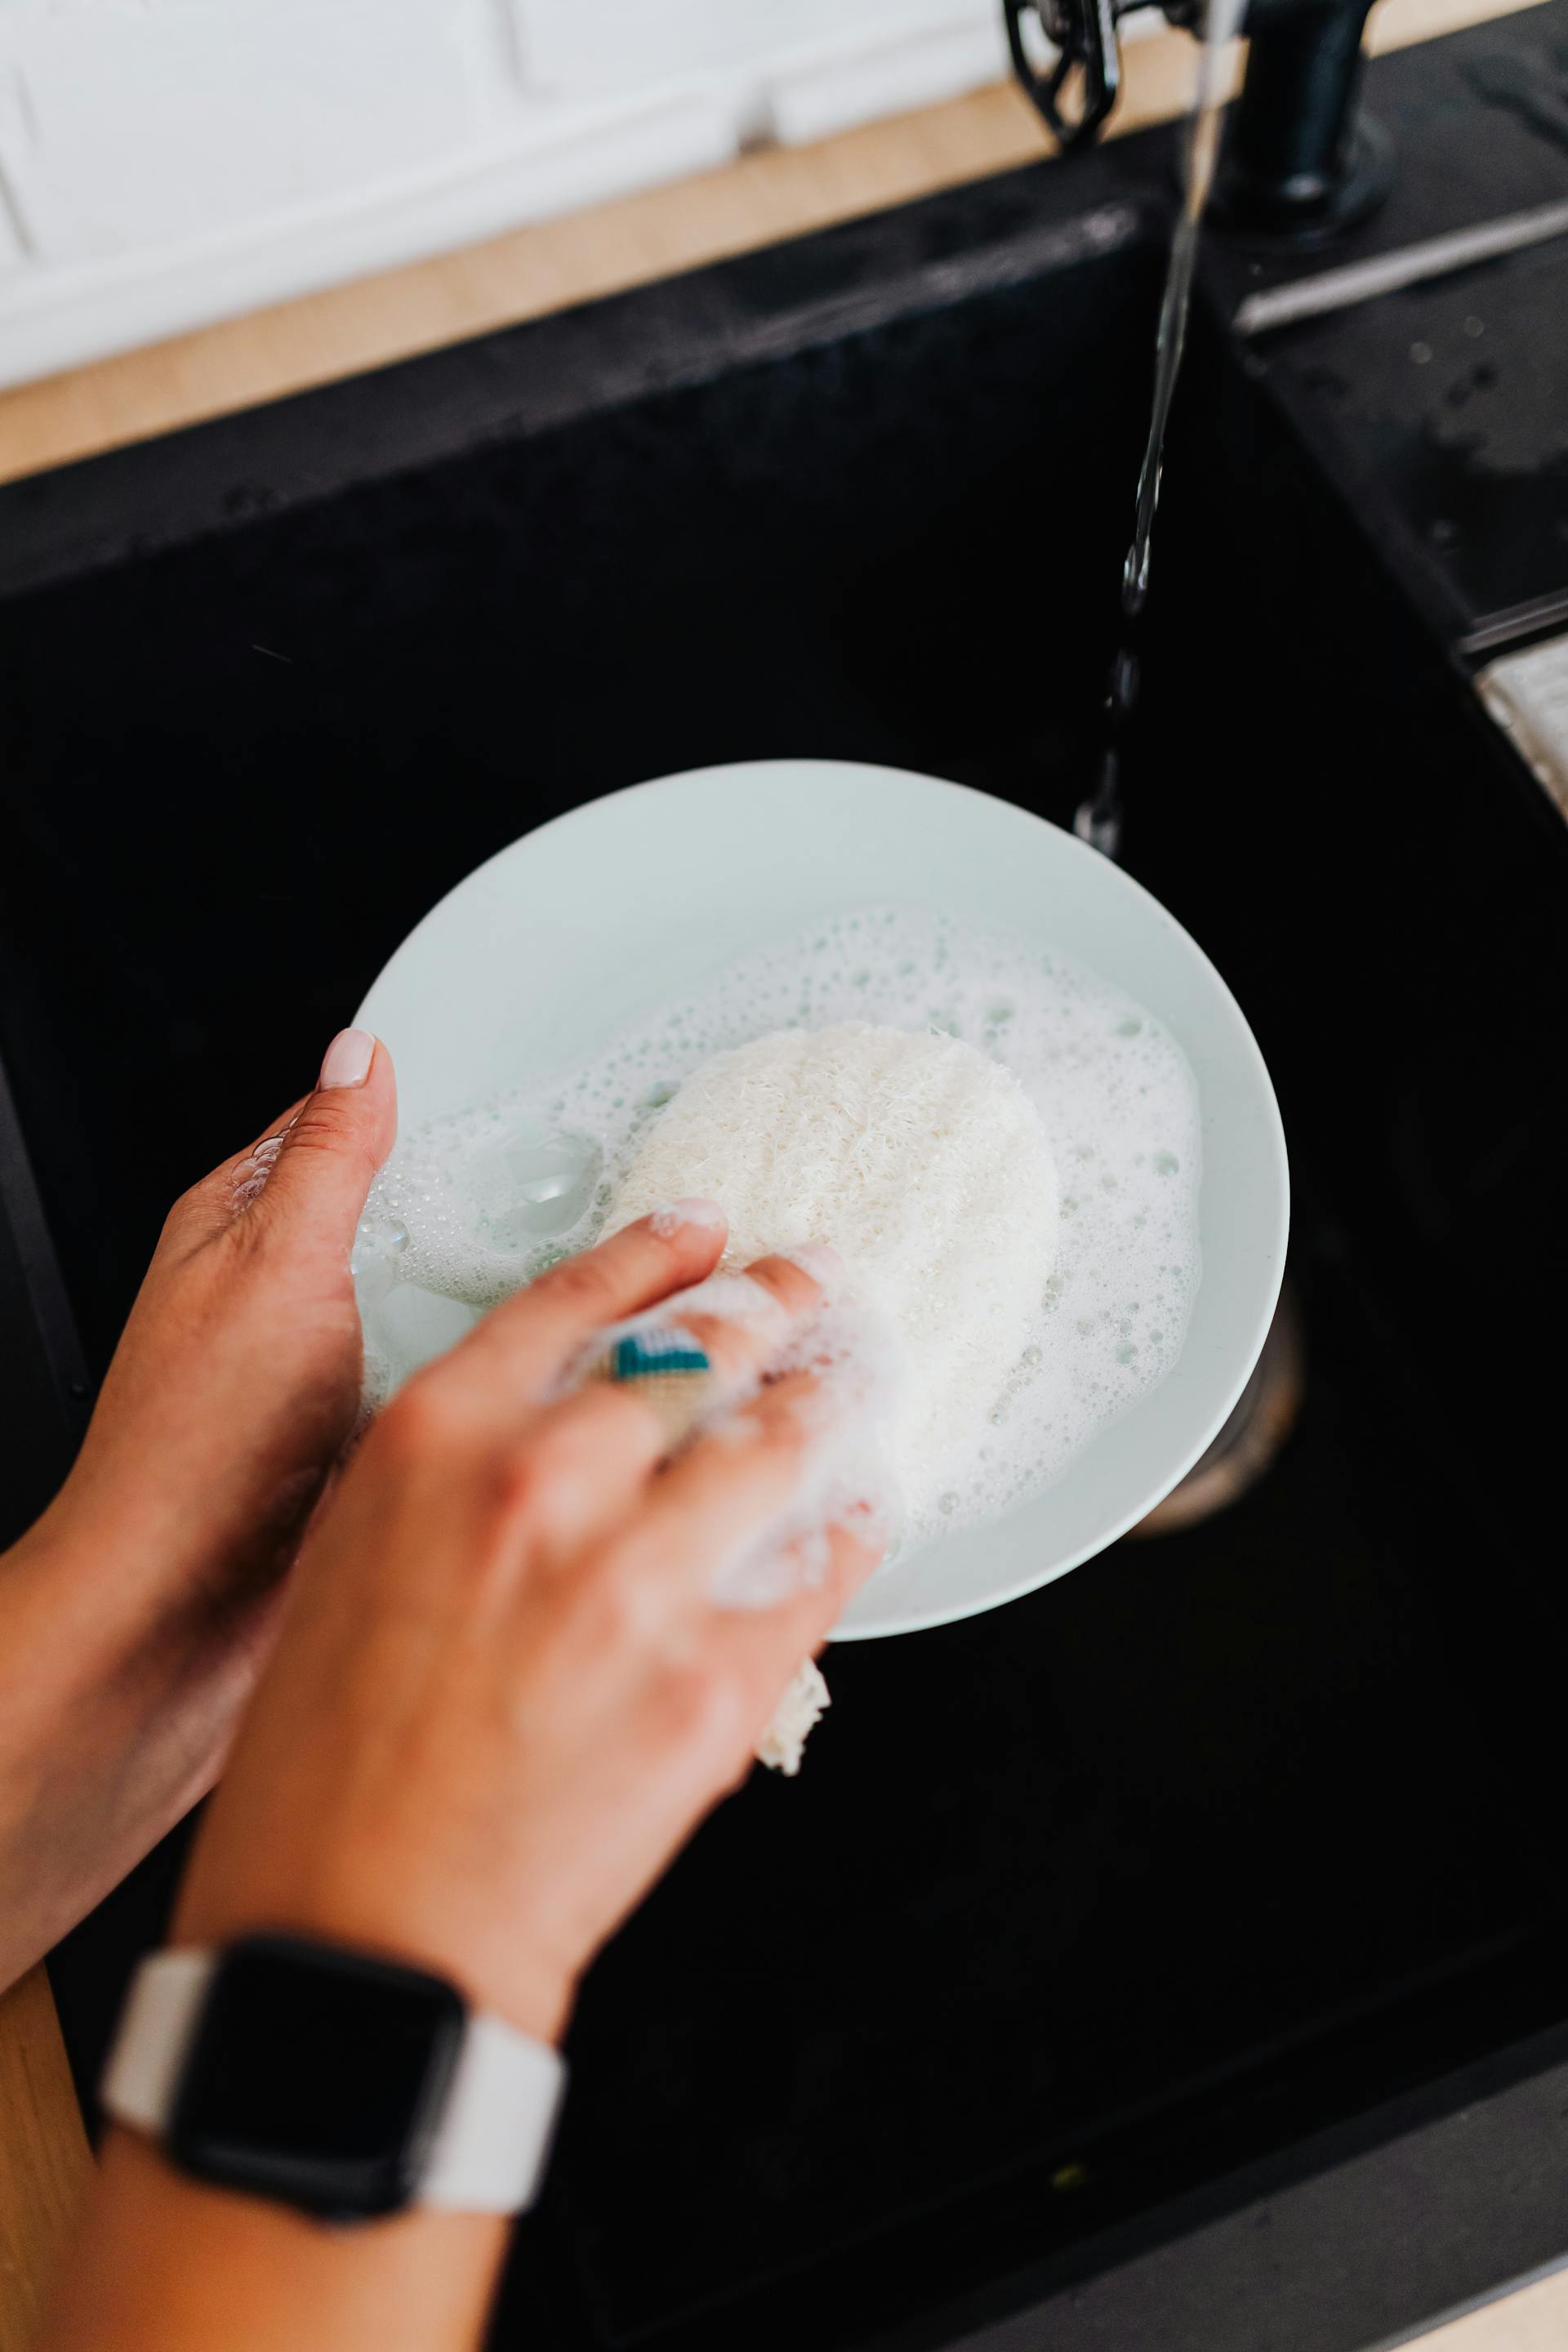 A person washing dishes | Source: Pexels